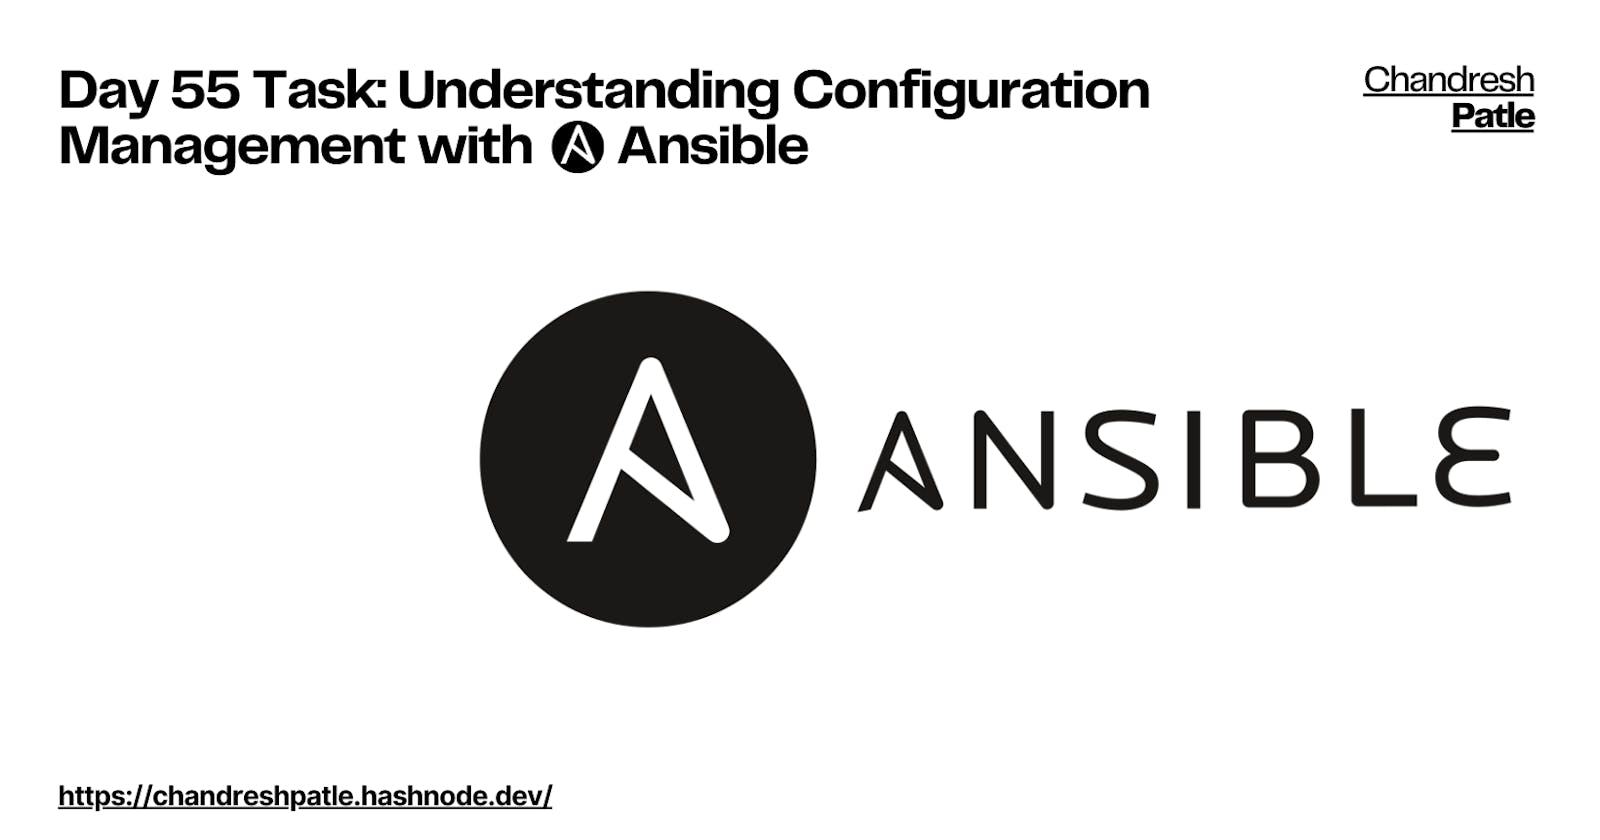 Day 55 Task: Understanding Configuration Management with Ansible